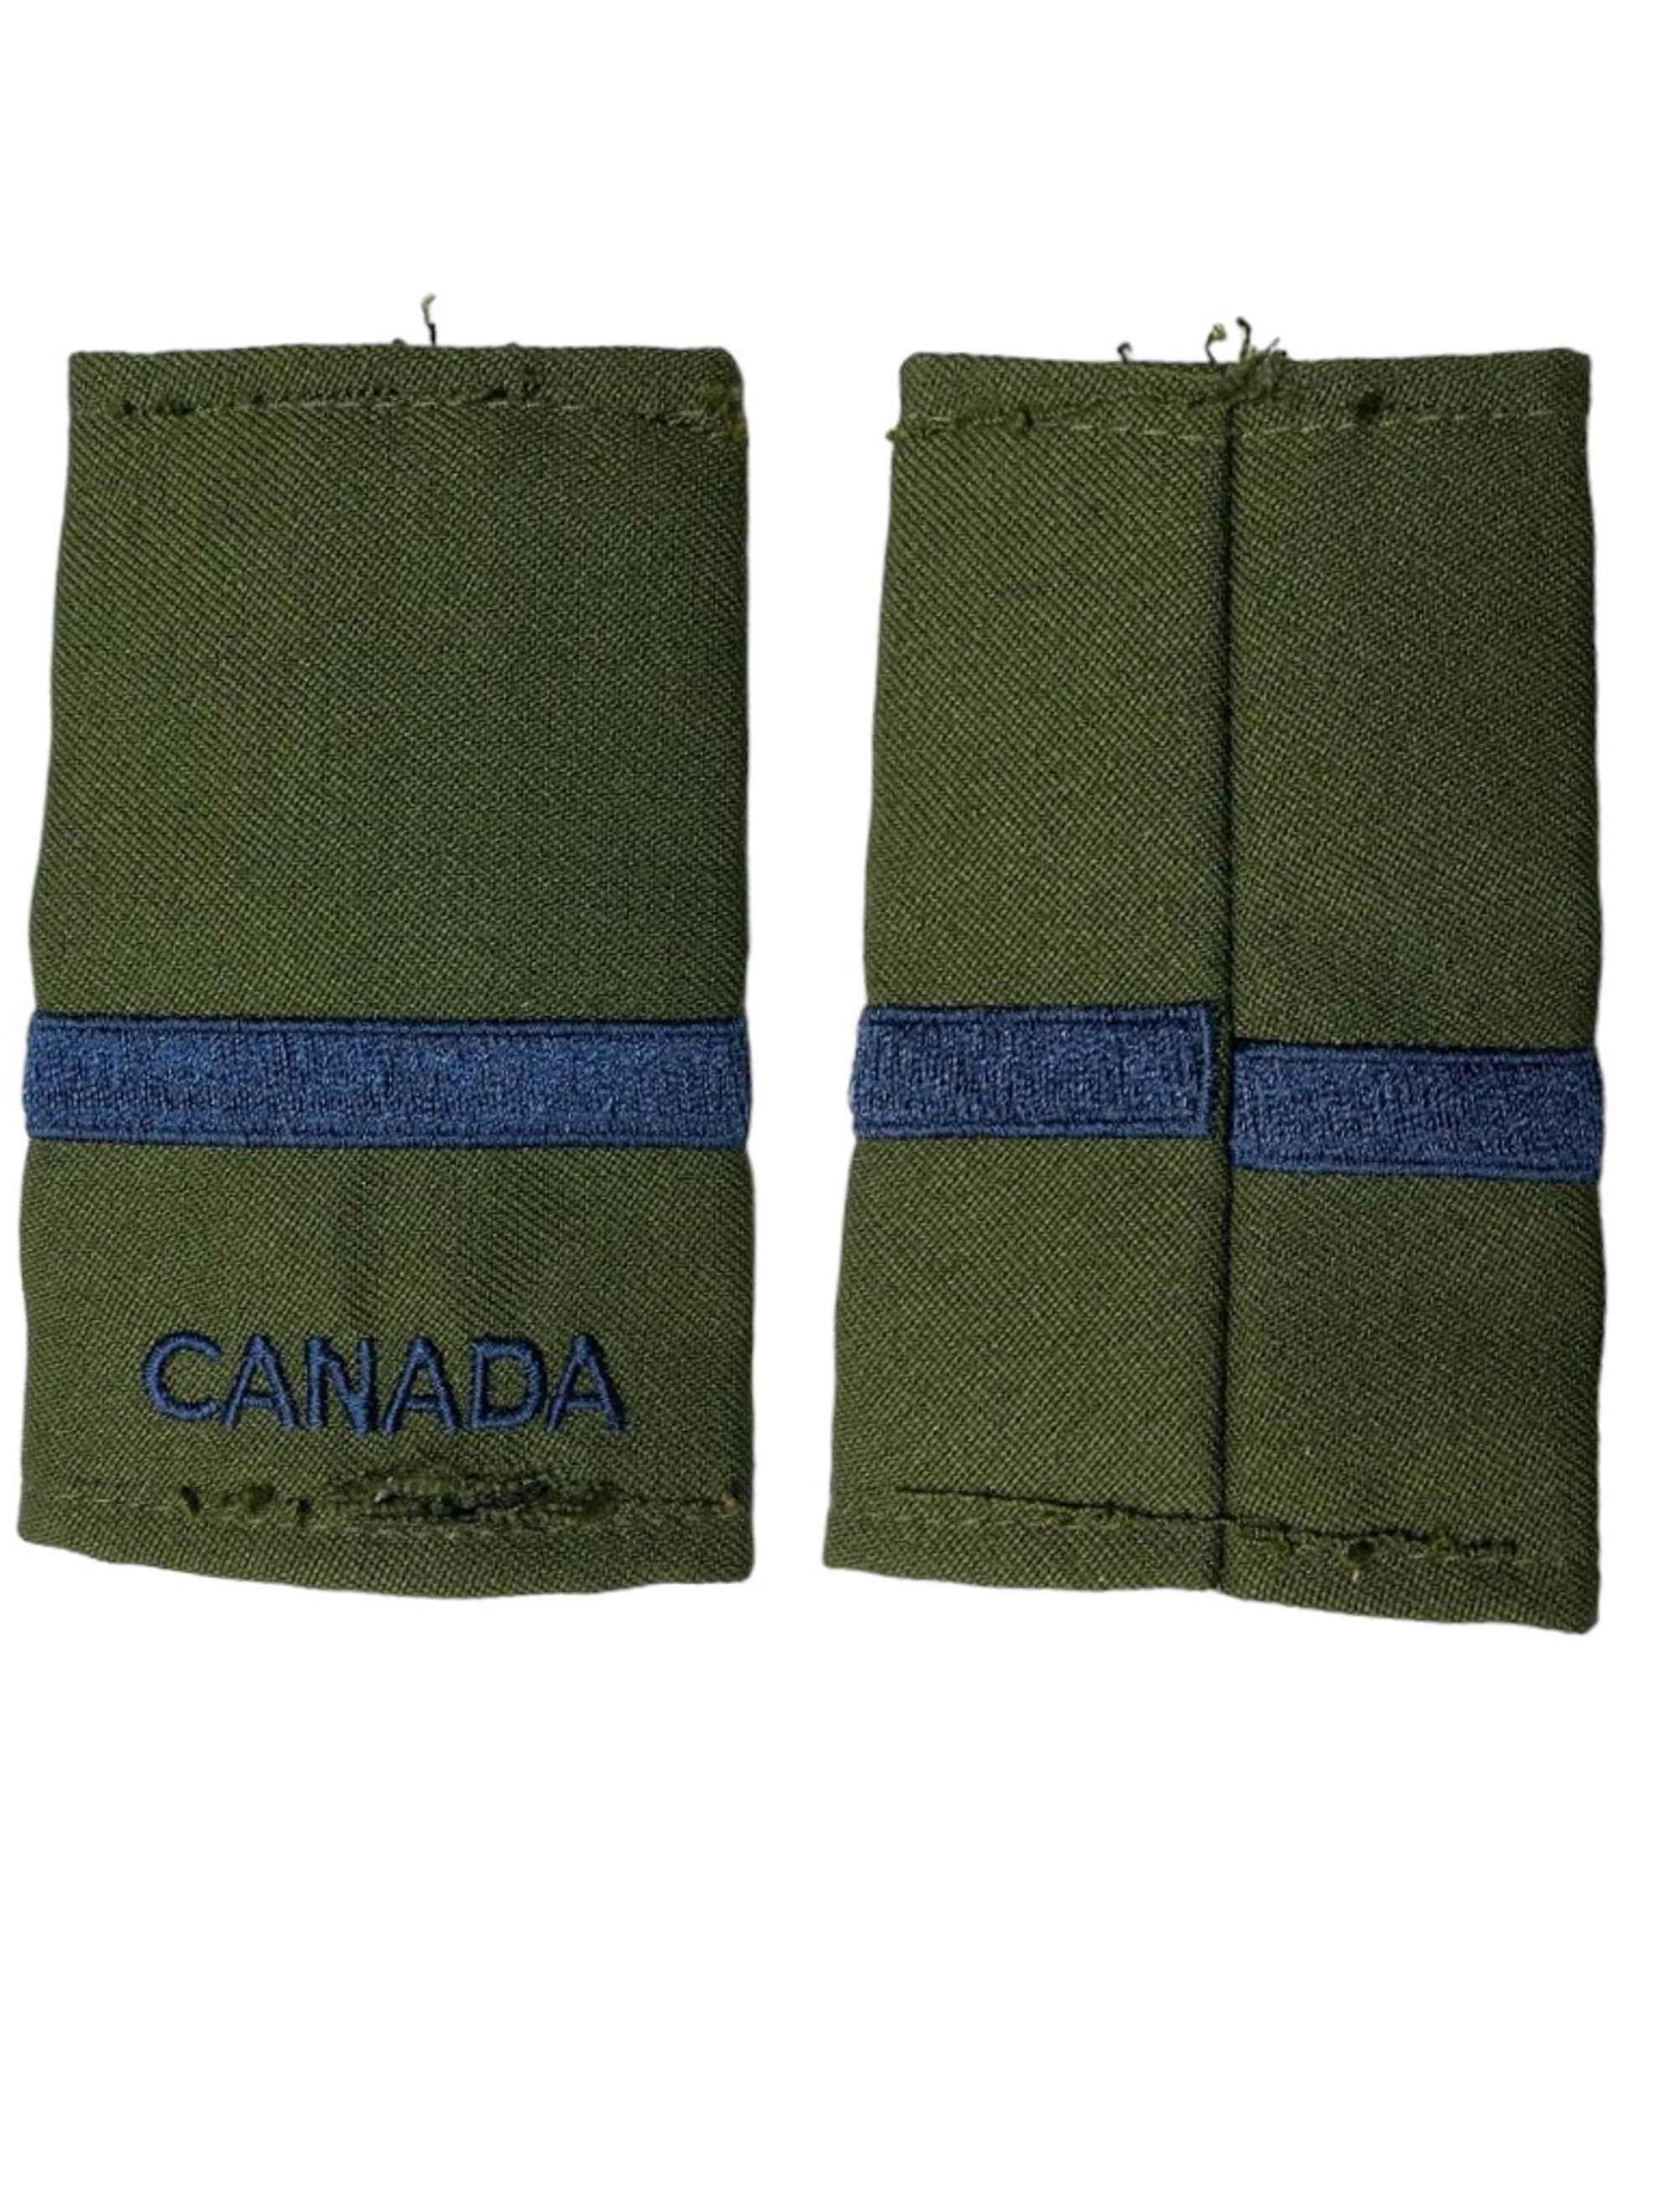 Canadian Armed Forces Green Rank Epaulets Air Force - Second Lieutenant 